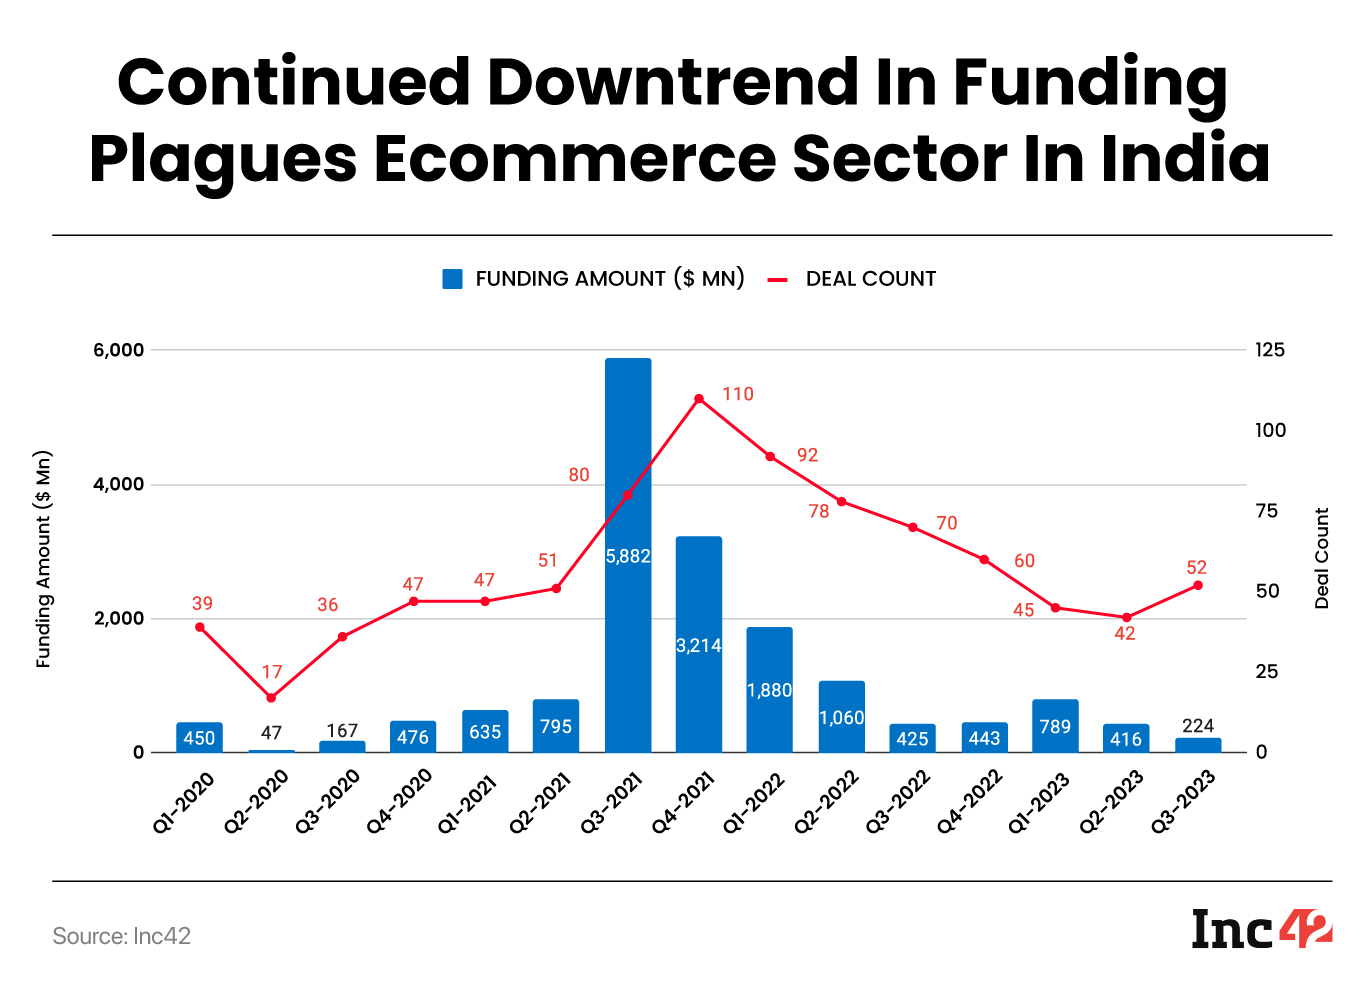 With Zero Mega Deals In Sight, Ecommerce Funding Falls 47% YoY To $224 Mn In Q3 2023